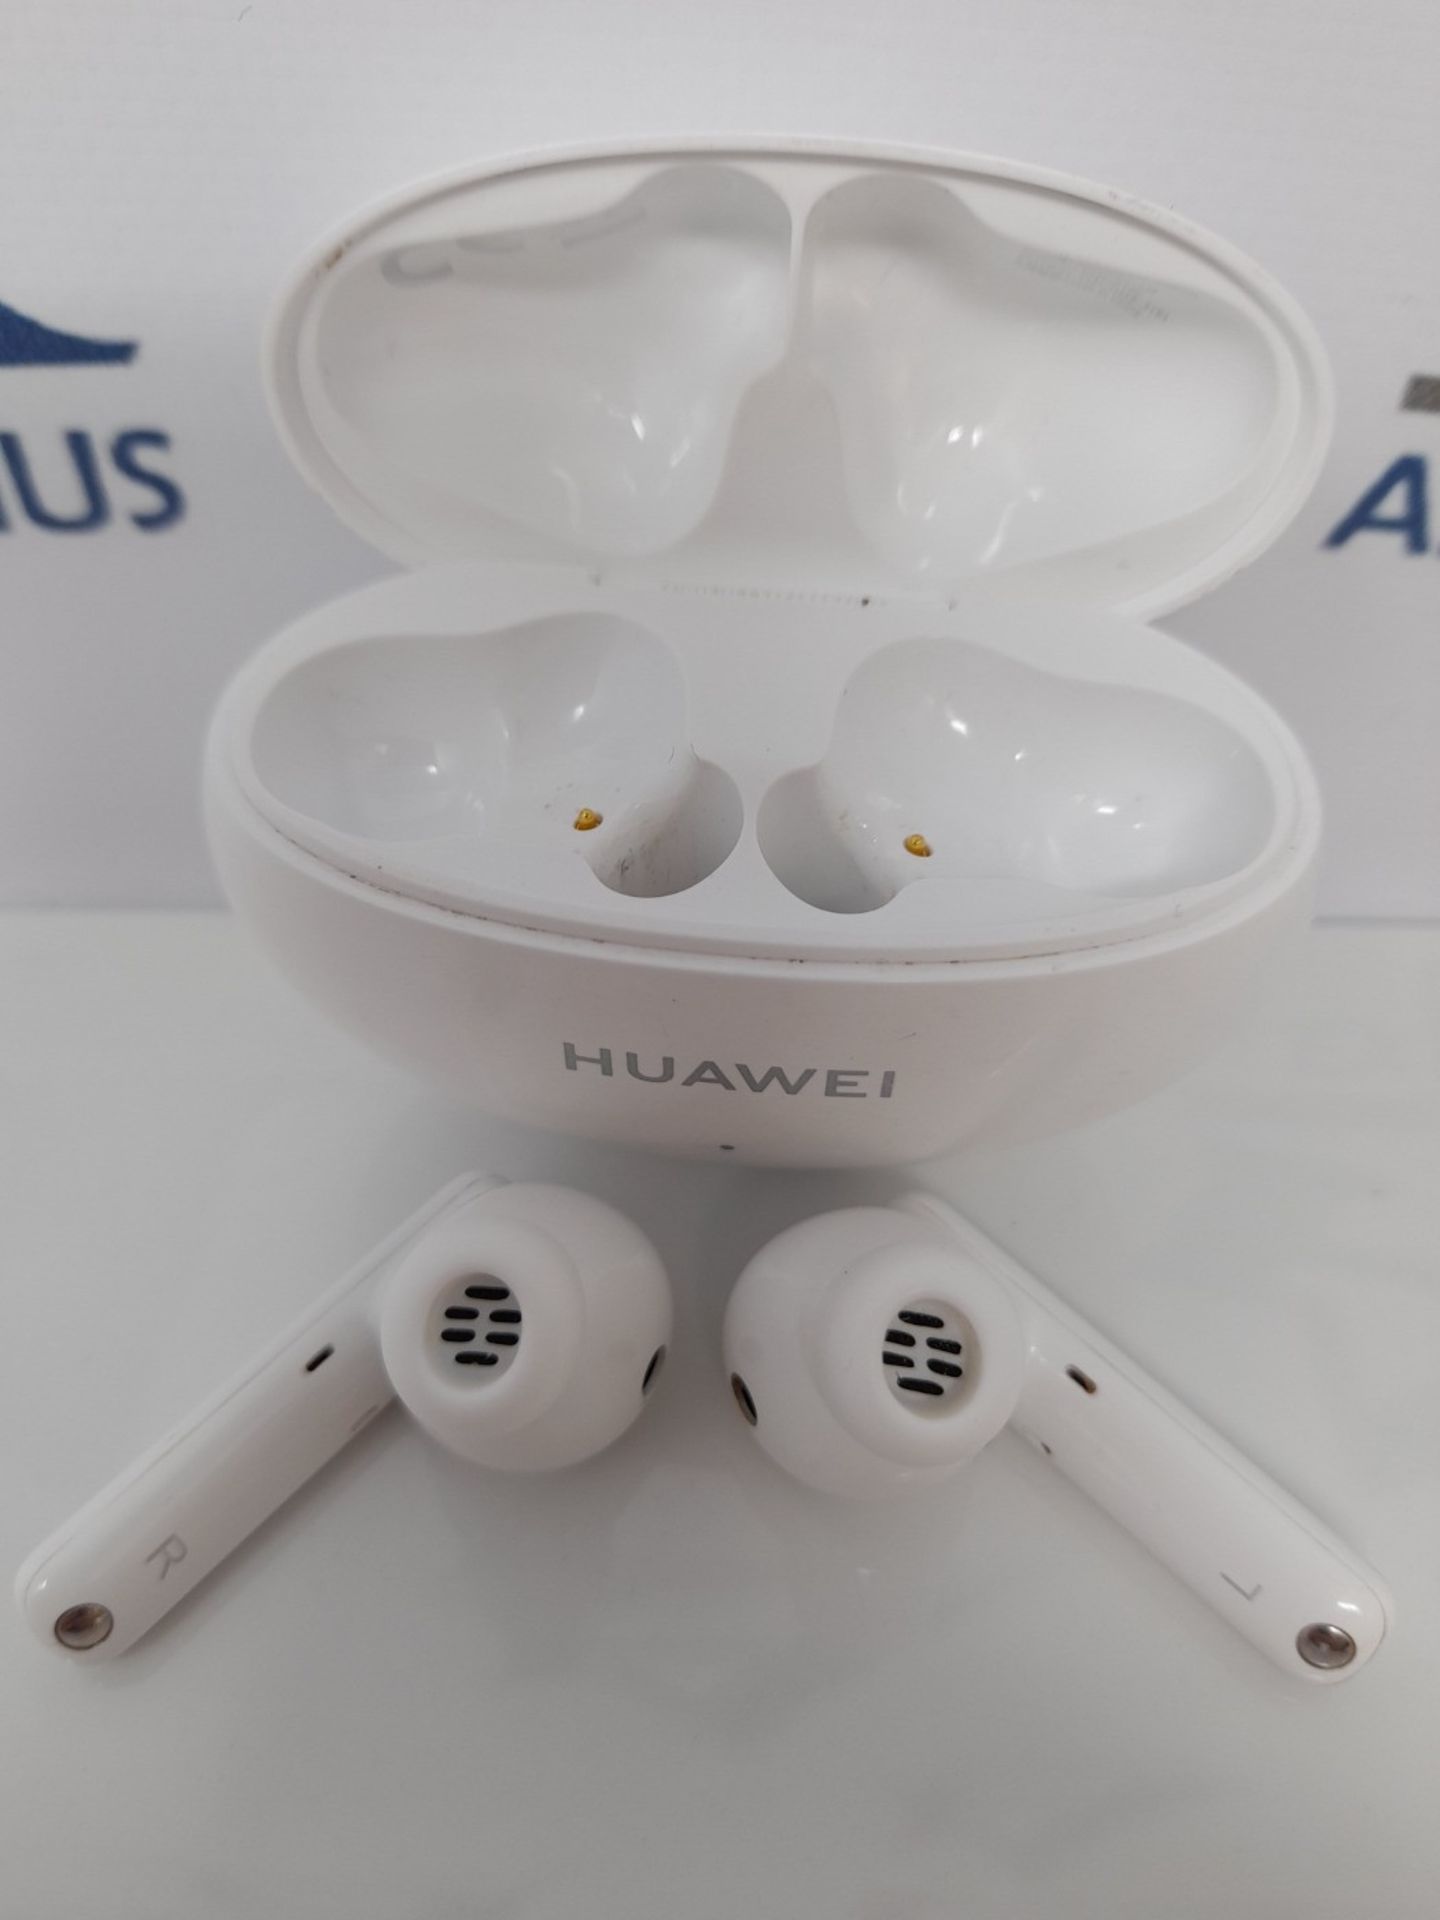 RRP £58.00 HUAWEI FreeBuds 4i Wireless In-Ear Bluetooth Headphones with Active Noise Cancellation - Image 3 of 3